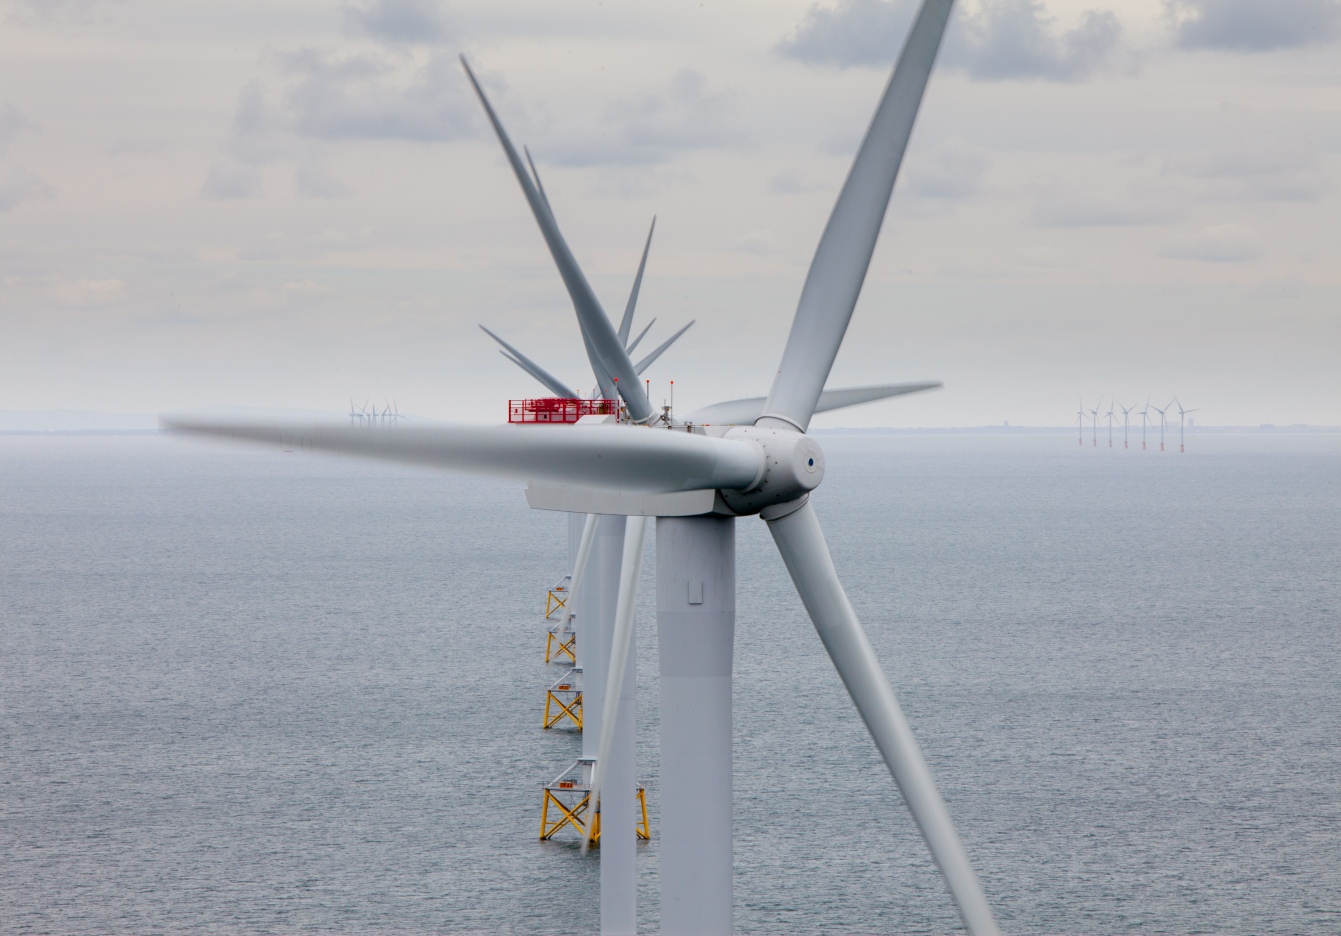 Senergy Study Shows UK Could More than Double Its Offshore Wind Energy Targets